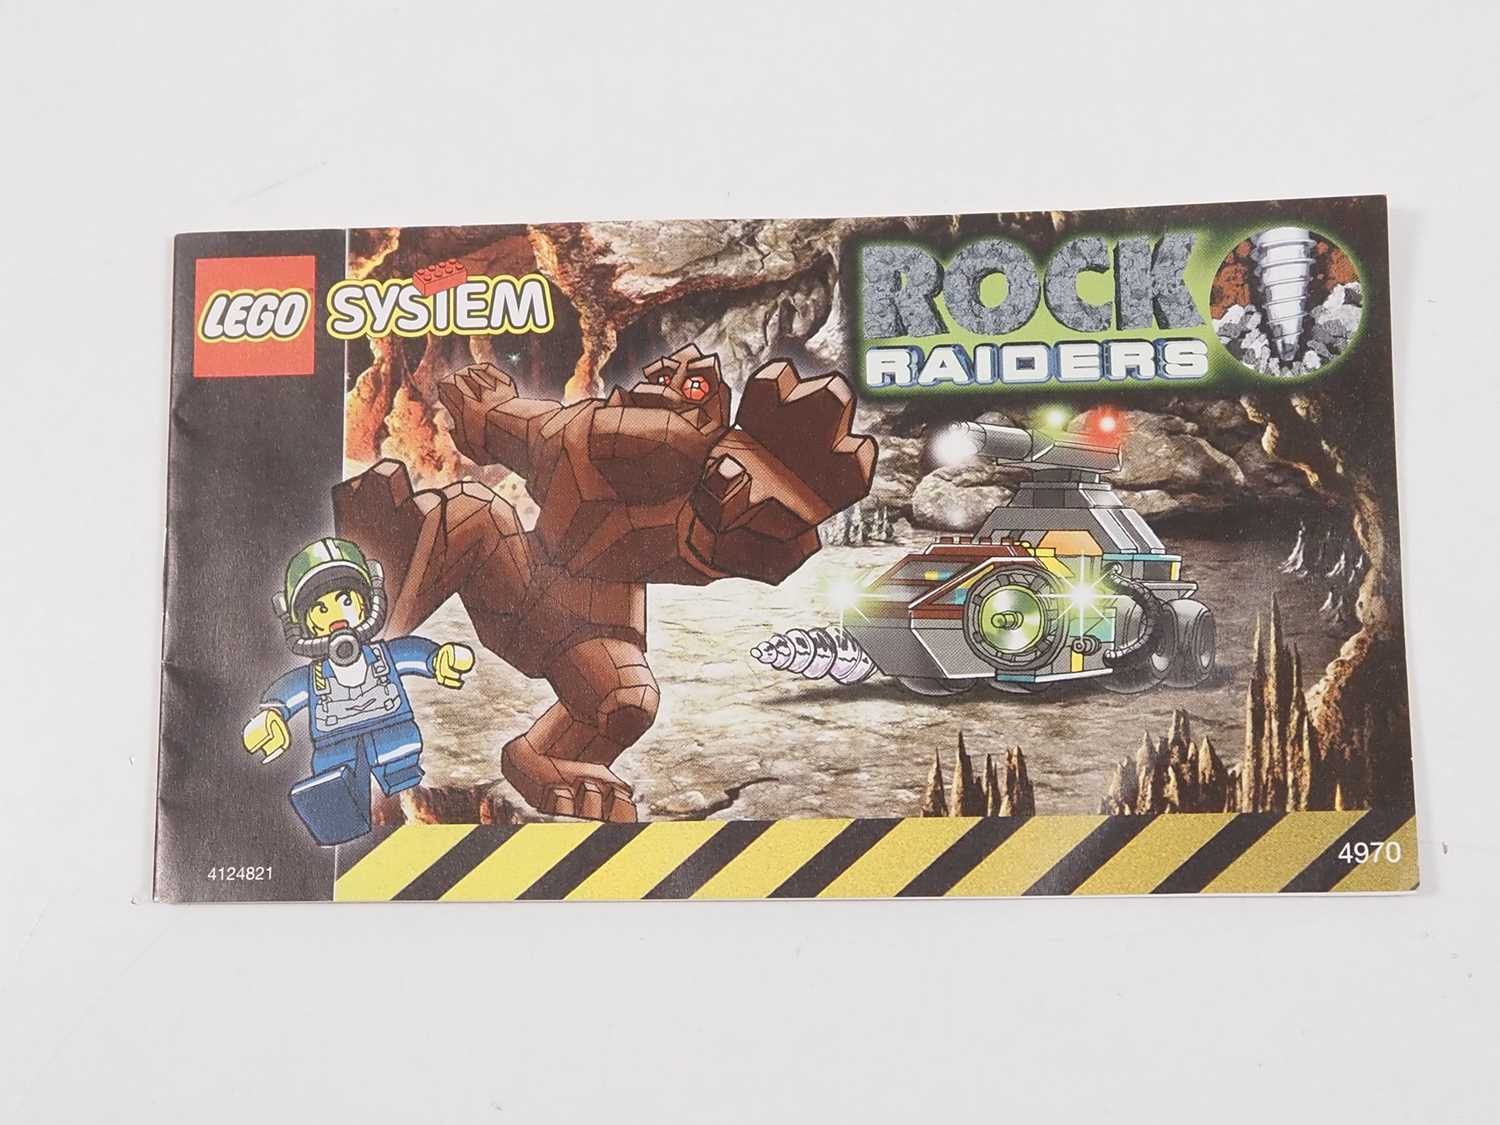 LEGO - ROCK RAIDERS #4970 Chrome Crusher - complete with instructions and picture book, battery - Image 3 of 5